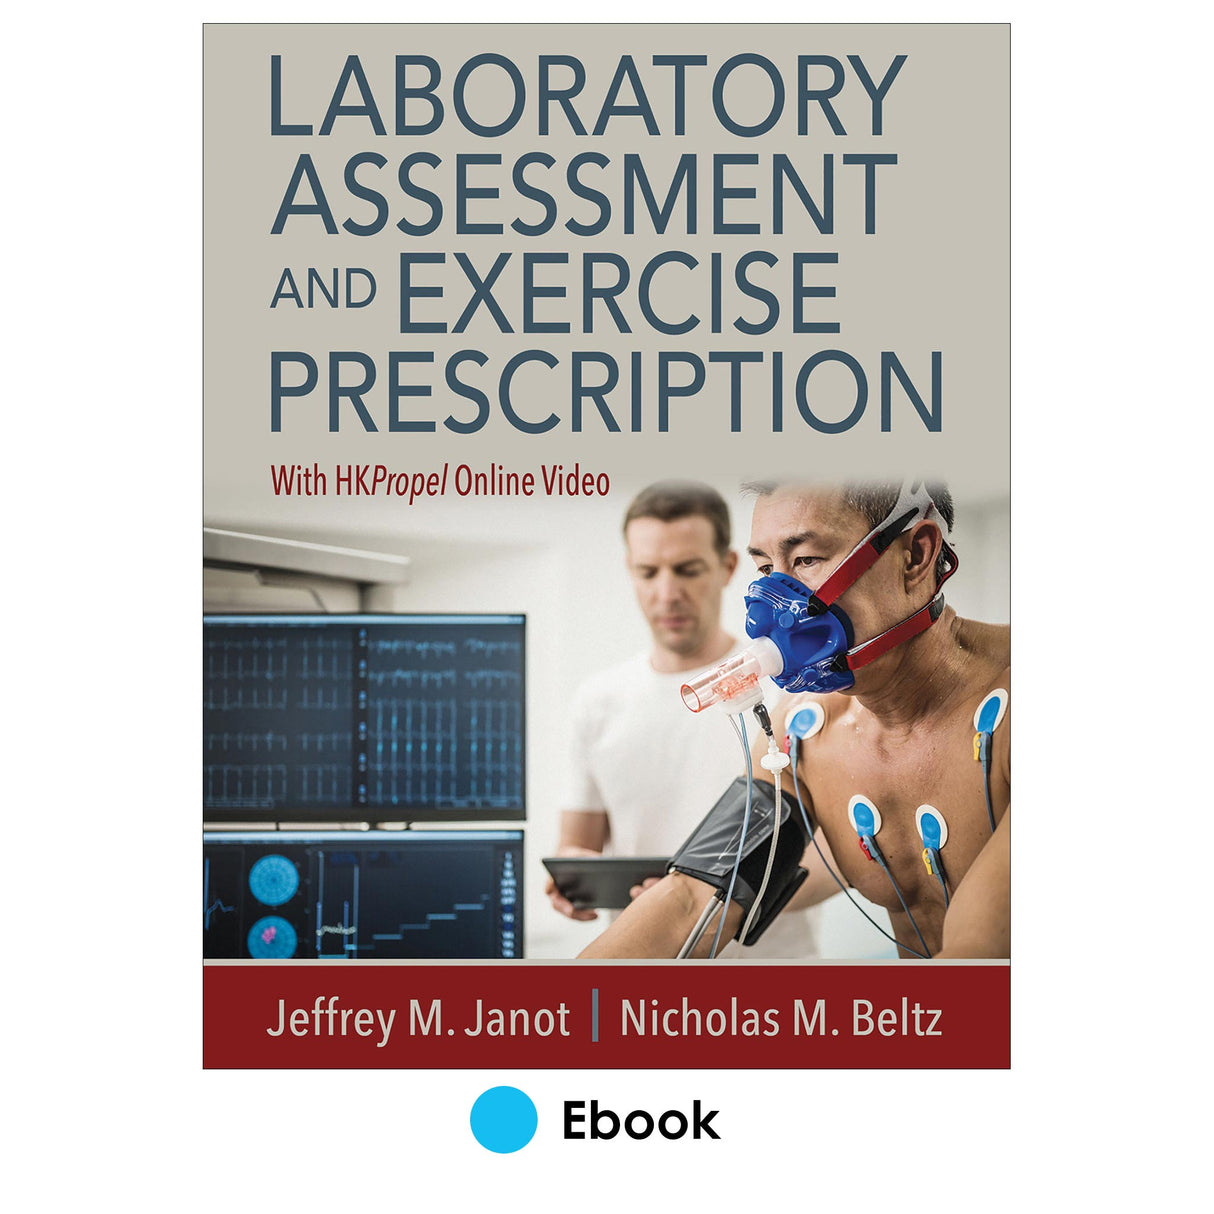 Laboratory Assessment and Exercise Prescription Ebook With HKPropel Online Video